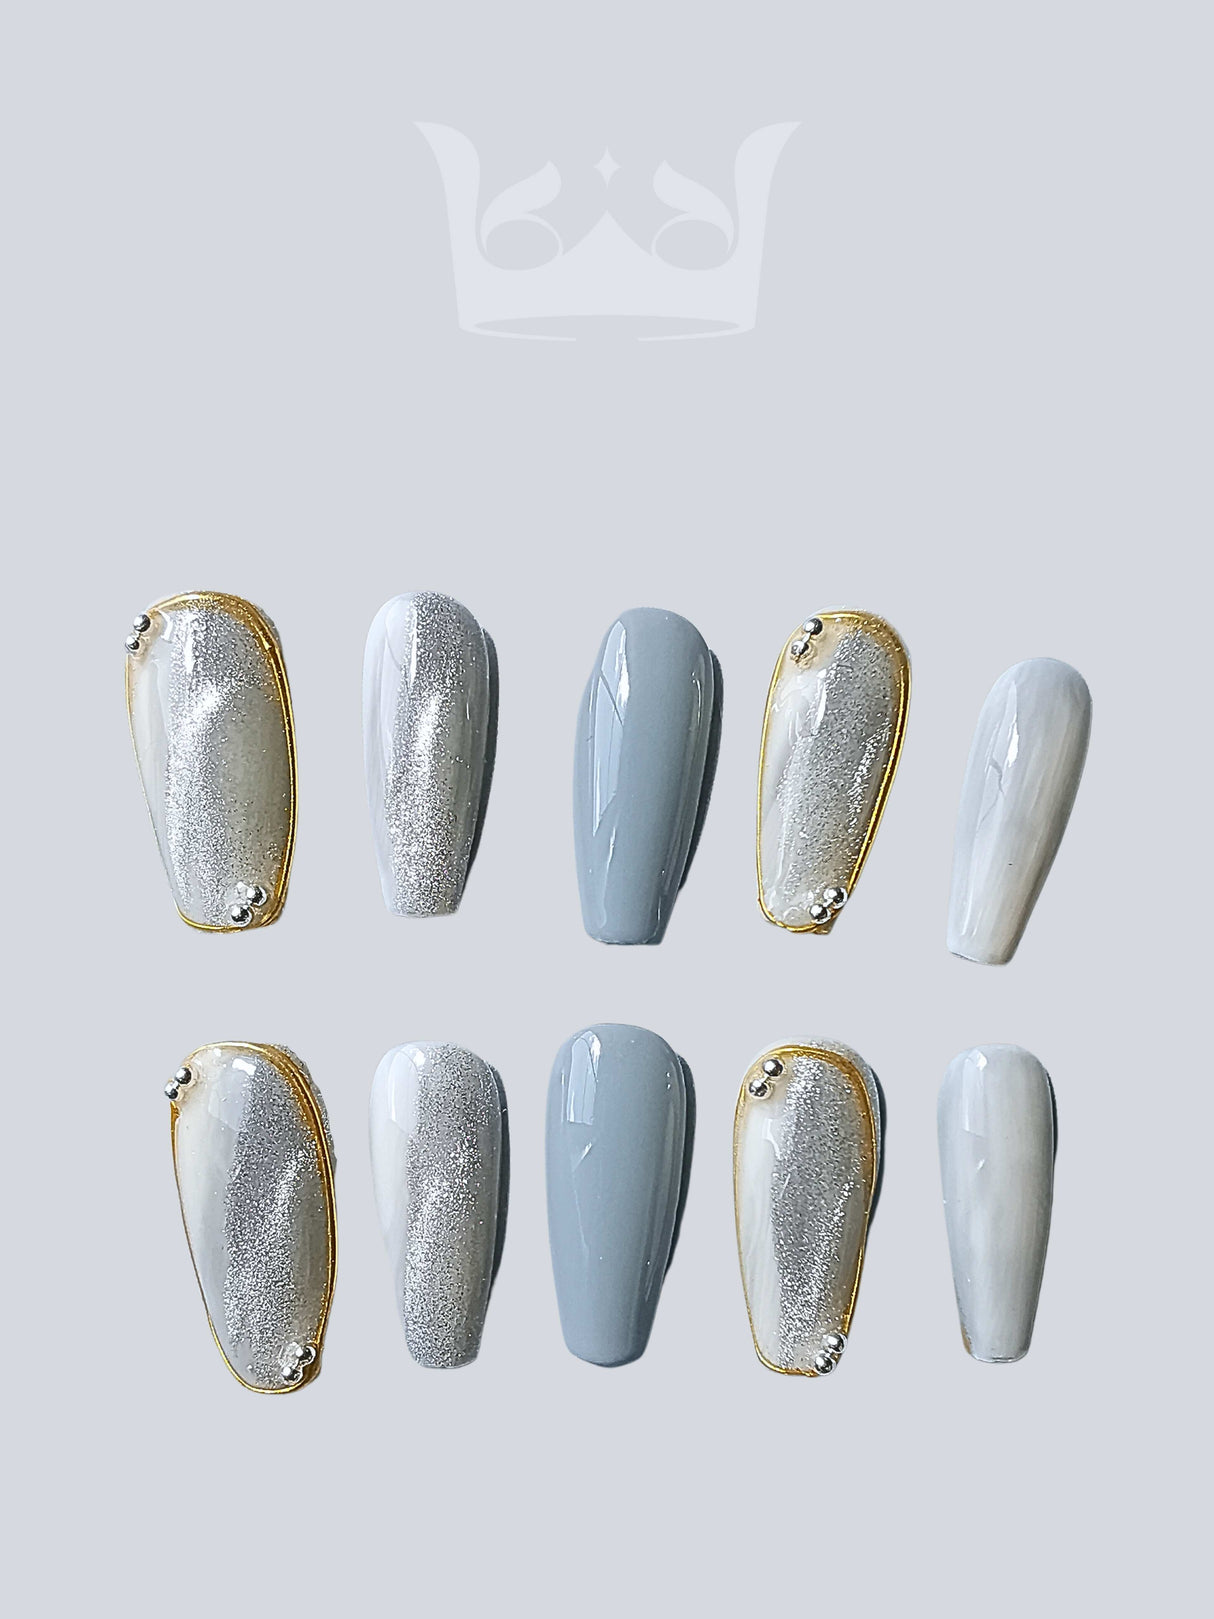 Sophisticated and modern nails with metallic silver and pastel blue colors, suitable for fashion events or personal style. Gold accent adds elegance.